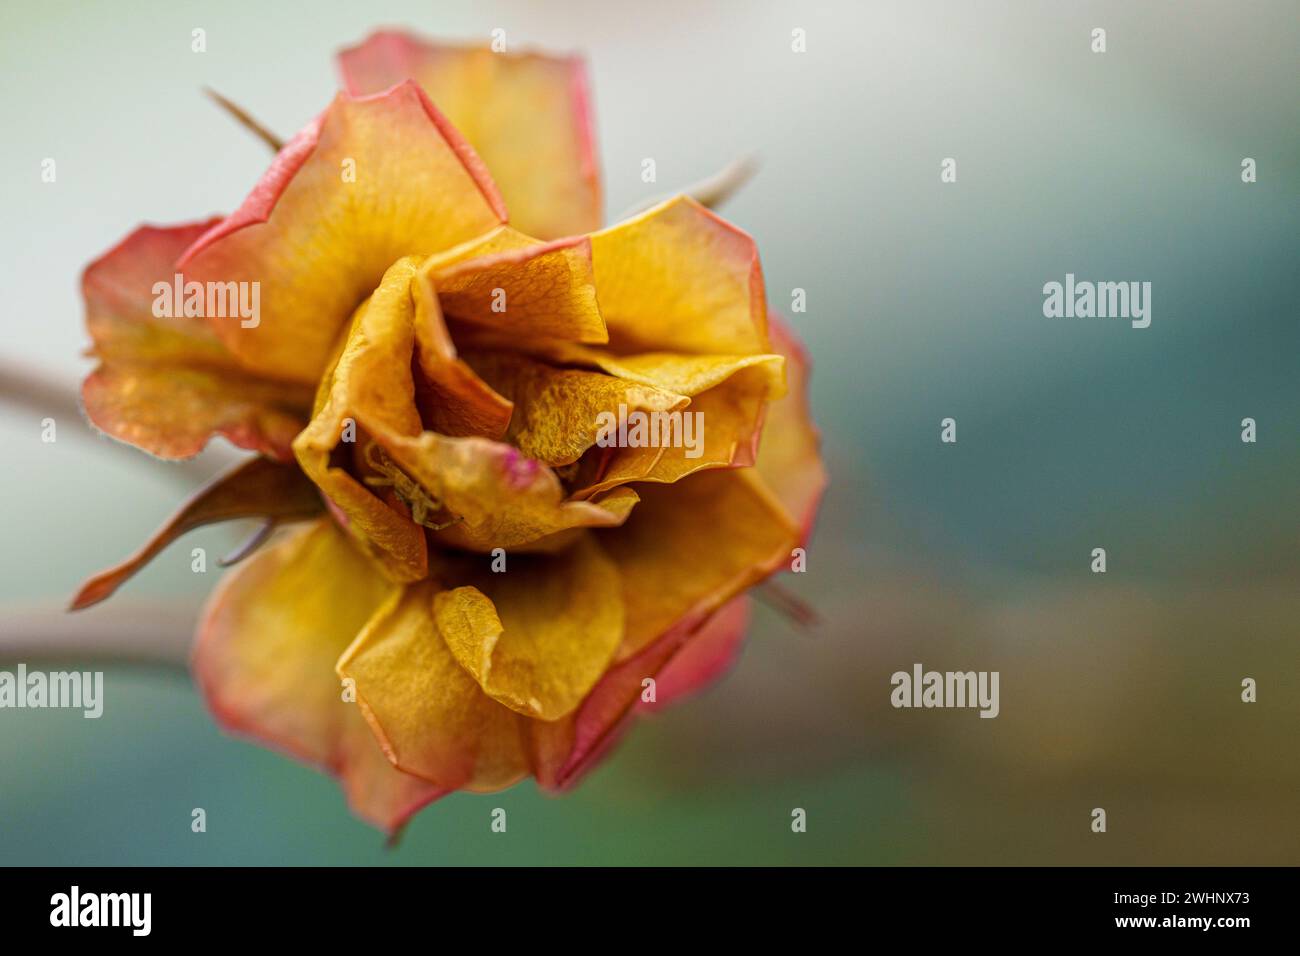 Vibrant yellow and red rose blossoming against a soft, blurred background Stock Photo